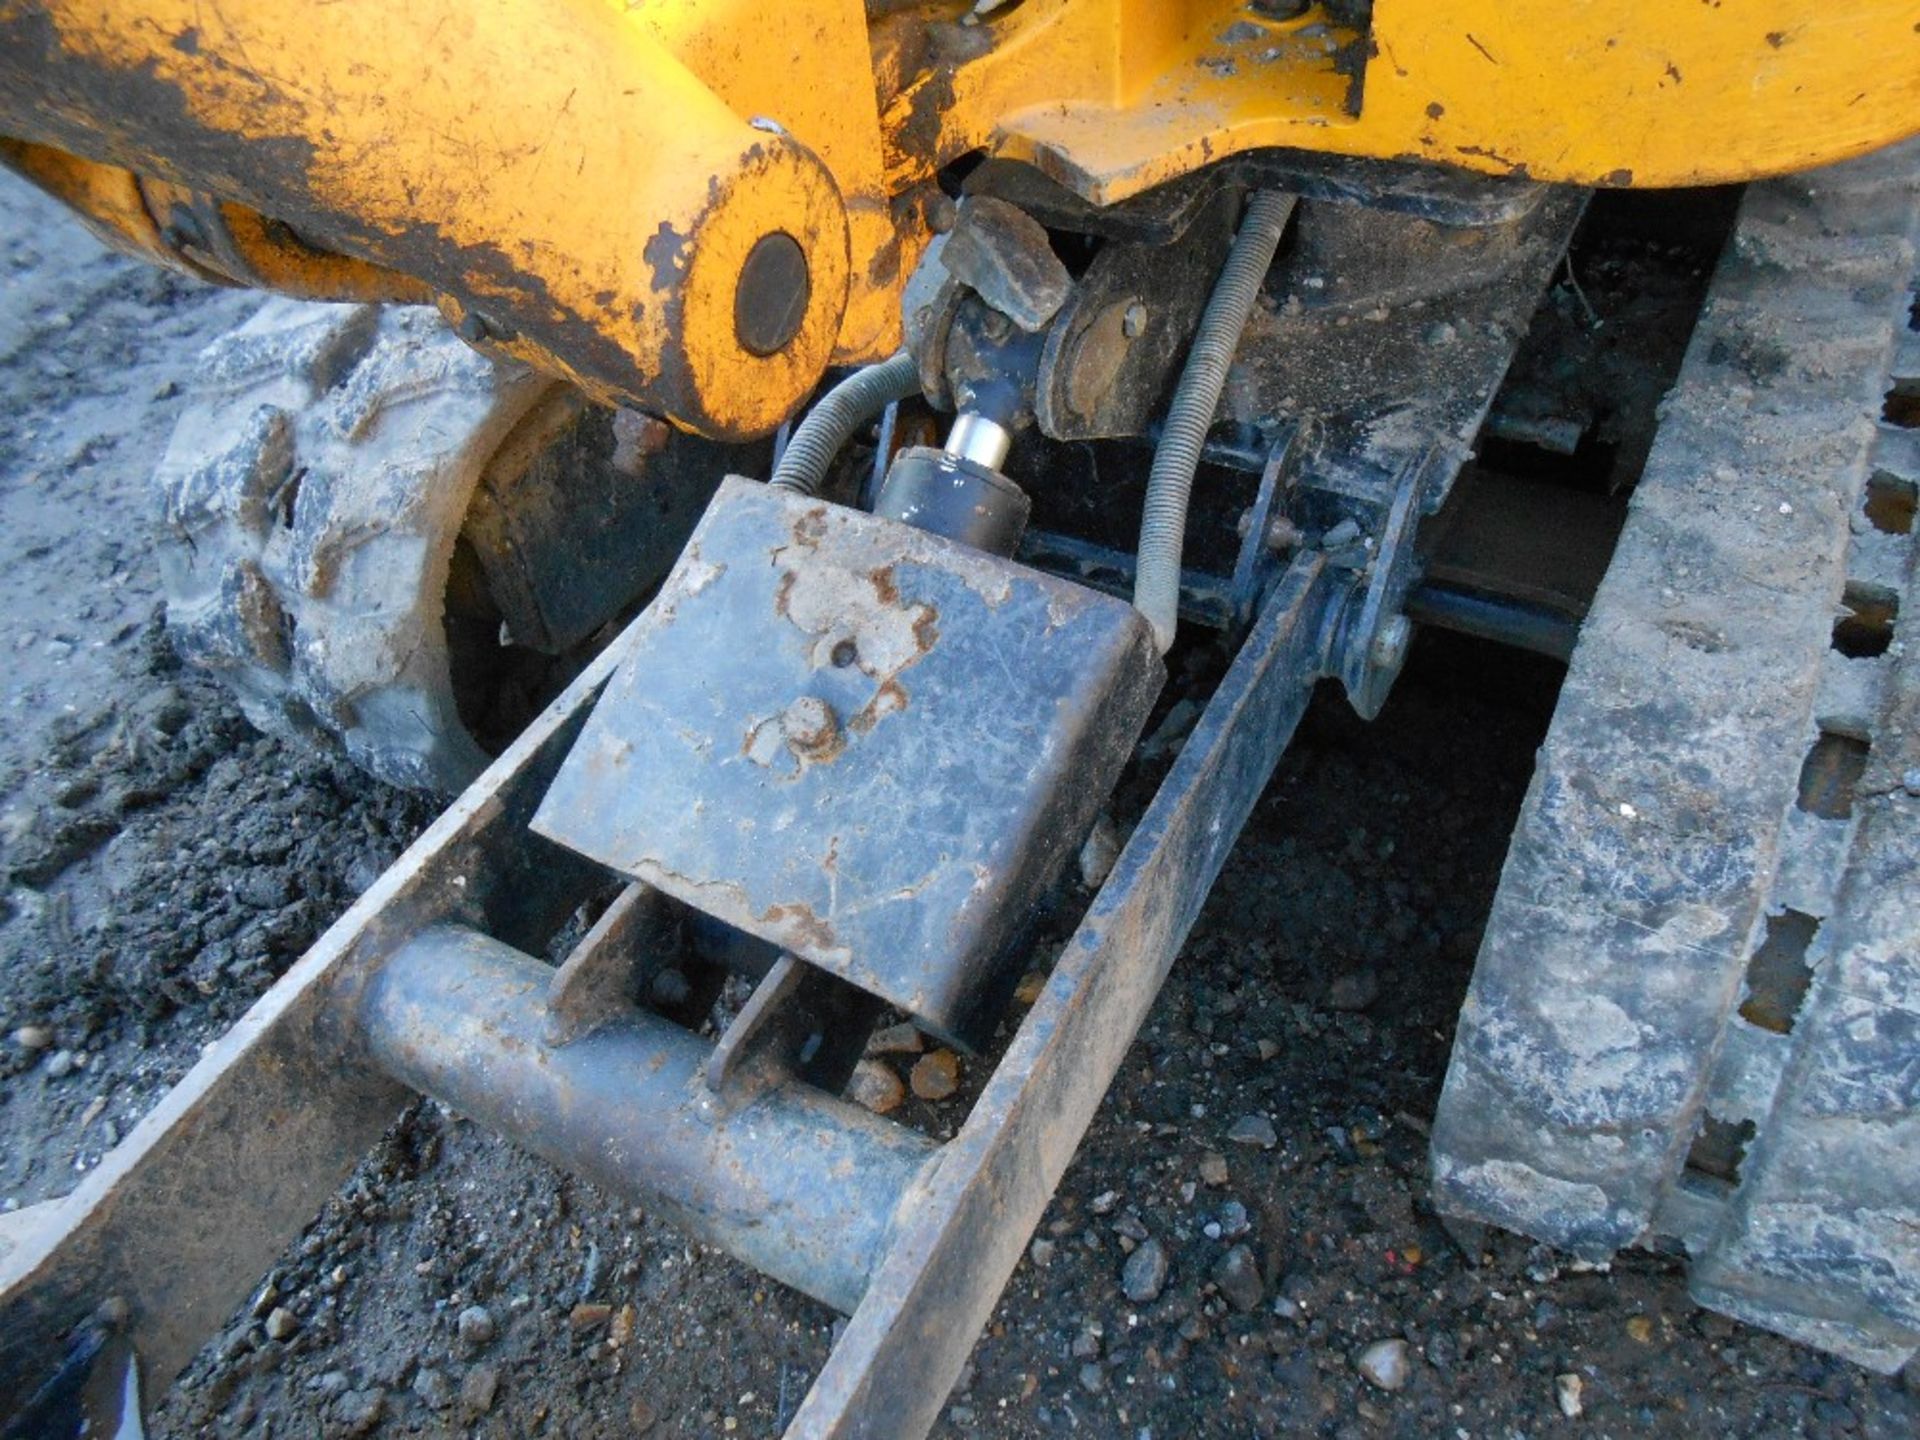 JCB 8008 micro excavator c/w 1no. bucket and expanding tracks yr2011 build 910 rec.hrs. - Image 8 of 10